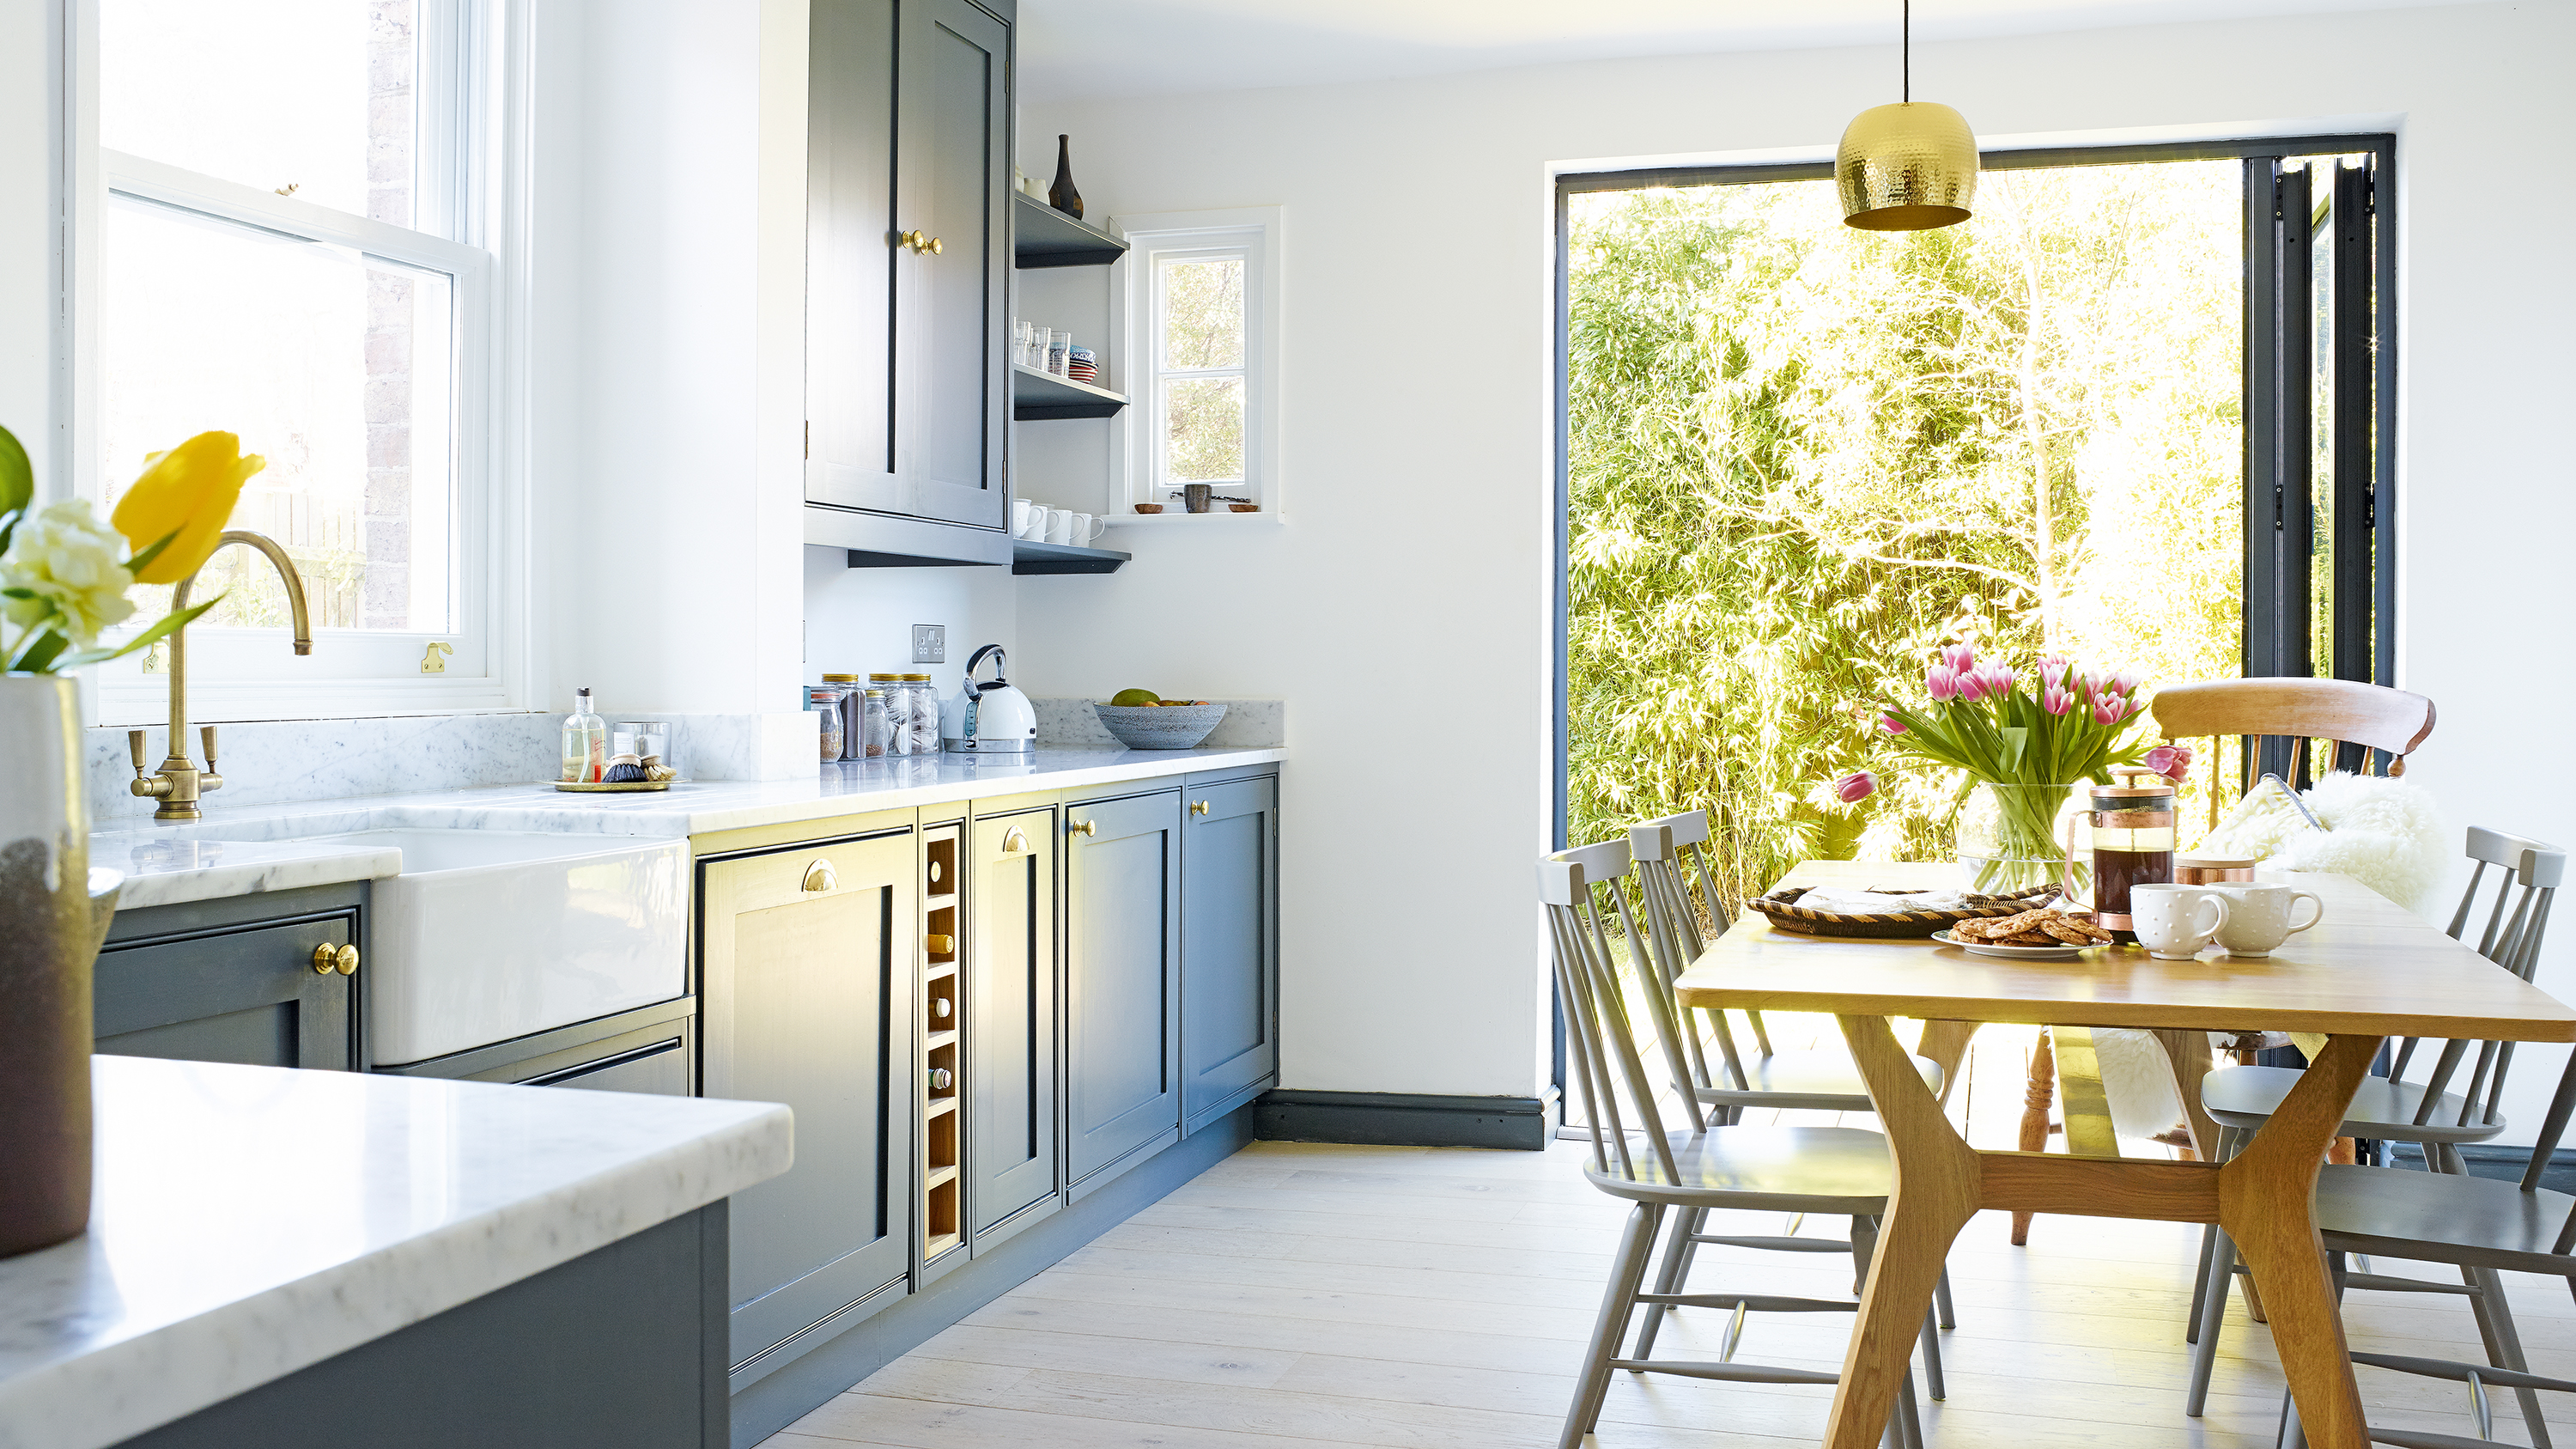 How To Make A Small Kitchen Look Bigger, How To Make A Small Kitchen Look Nice